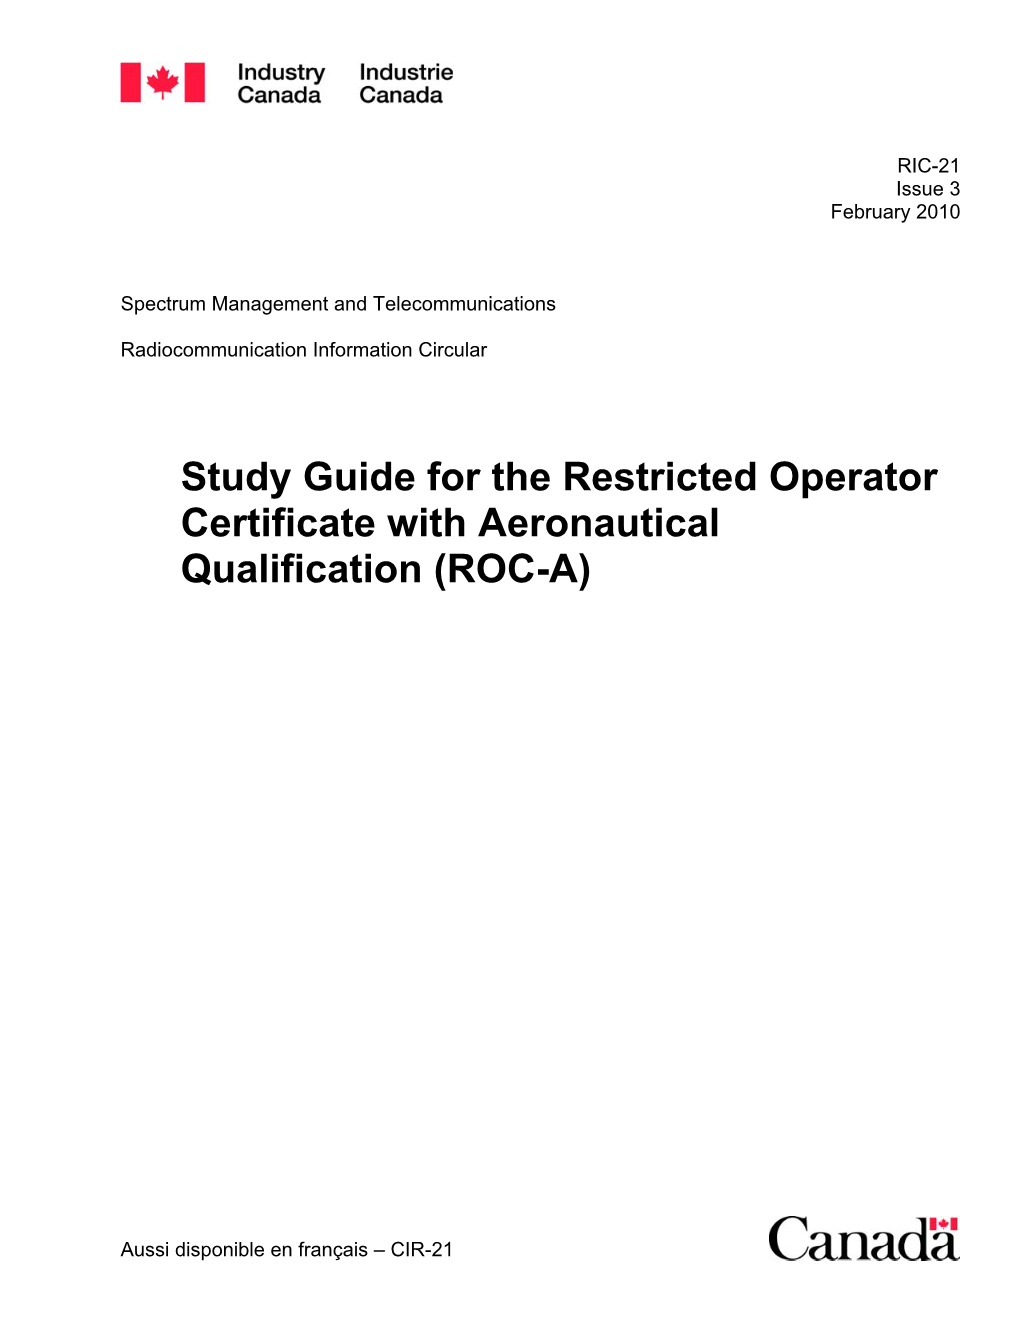 Study Guide for the Restricted Operator Certificate with Aeronautical Qualification (ROC-A)